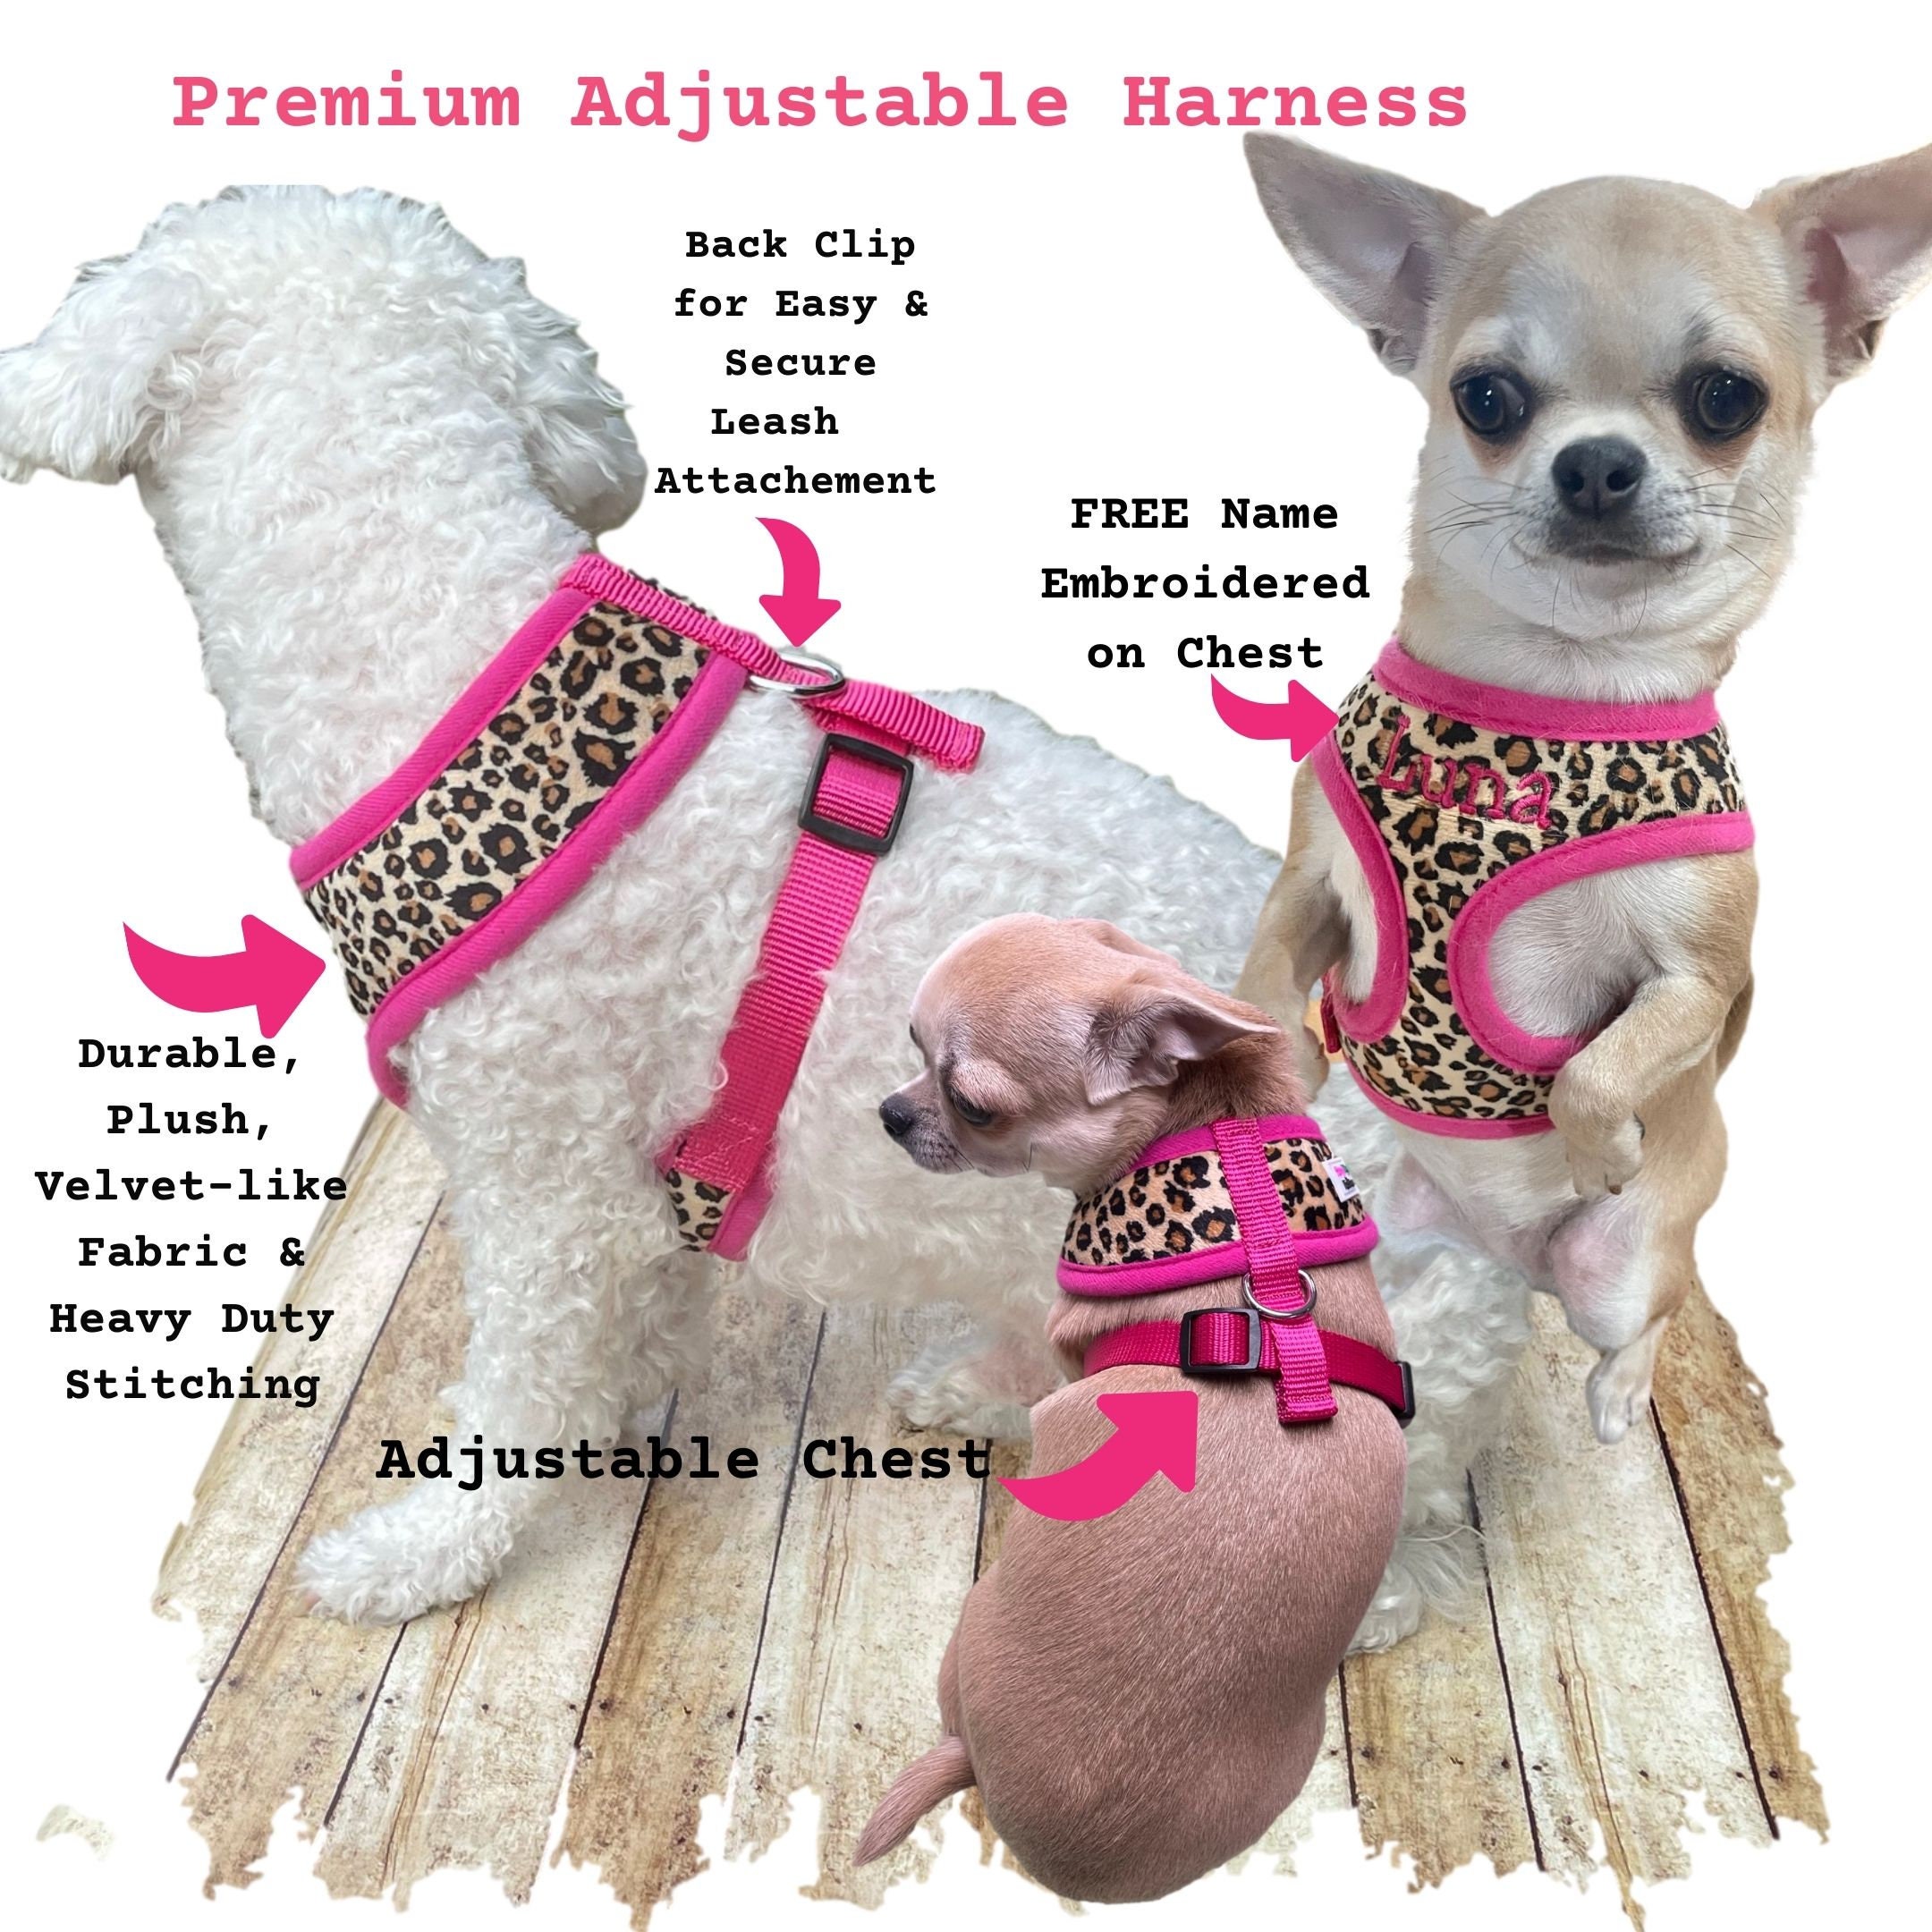  Luxury Dog Collar Leash Set Harness Designer Small and  Medium-Sized Dog Pet Collar Pug Chihuahua Adjustable Dog Collar Set Strong  Protection Safe pet Leash (Color : Harness, Size : XXL) 